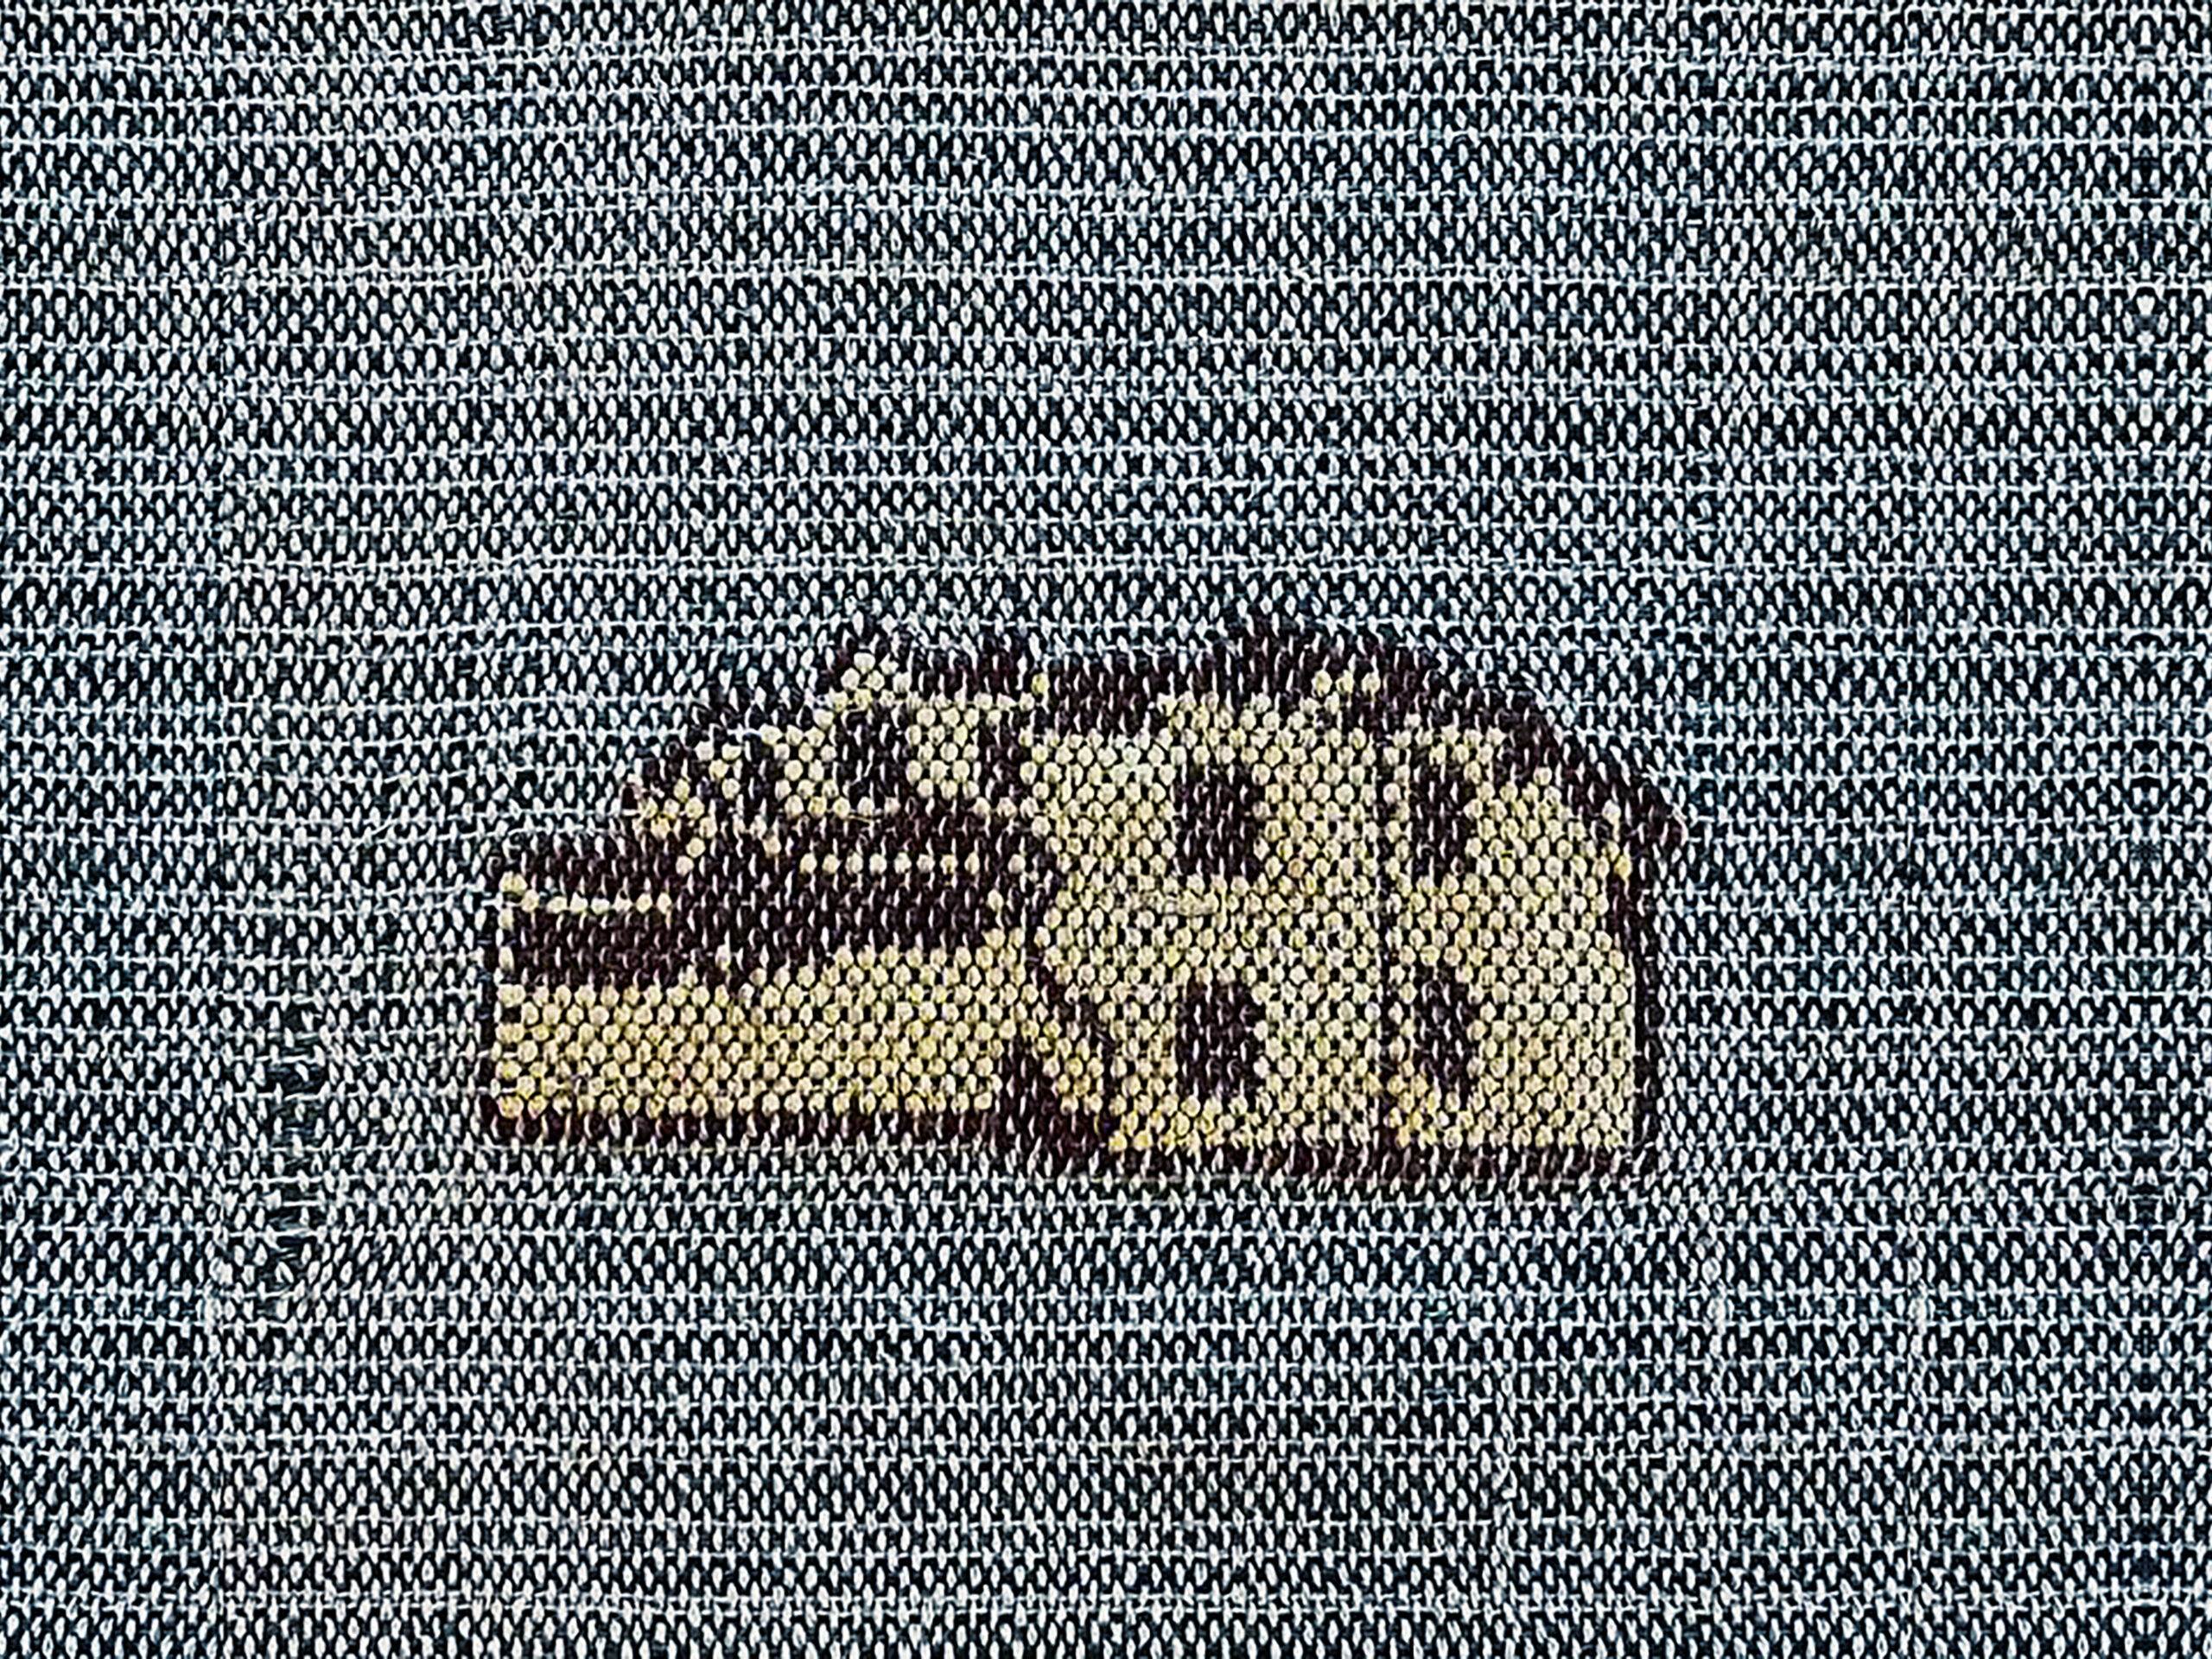 Threads of various blue hues woven together into a rectangle. In the middle of the woven rectangle is a woven image of a yellow and brown two-story home.